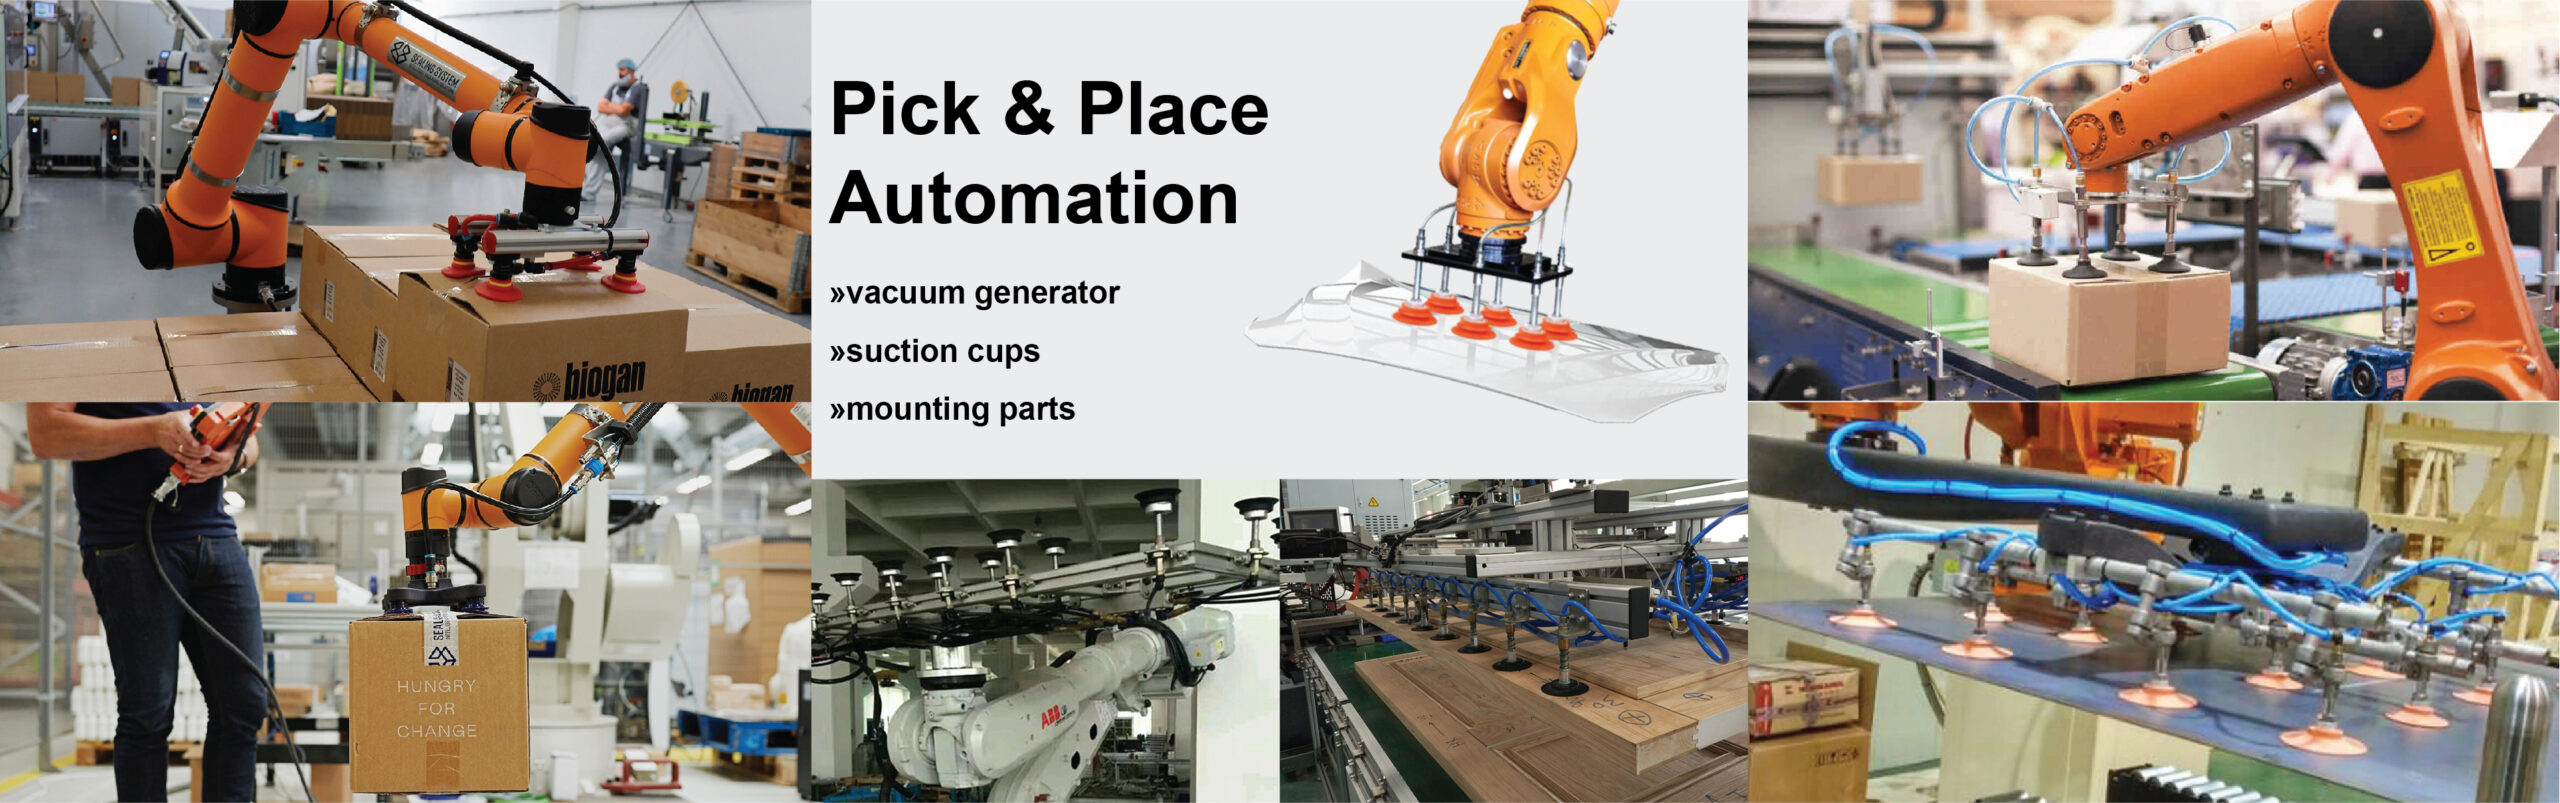 Pick and place automation